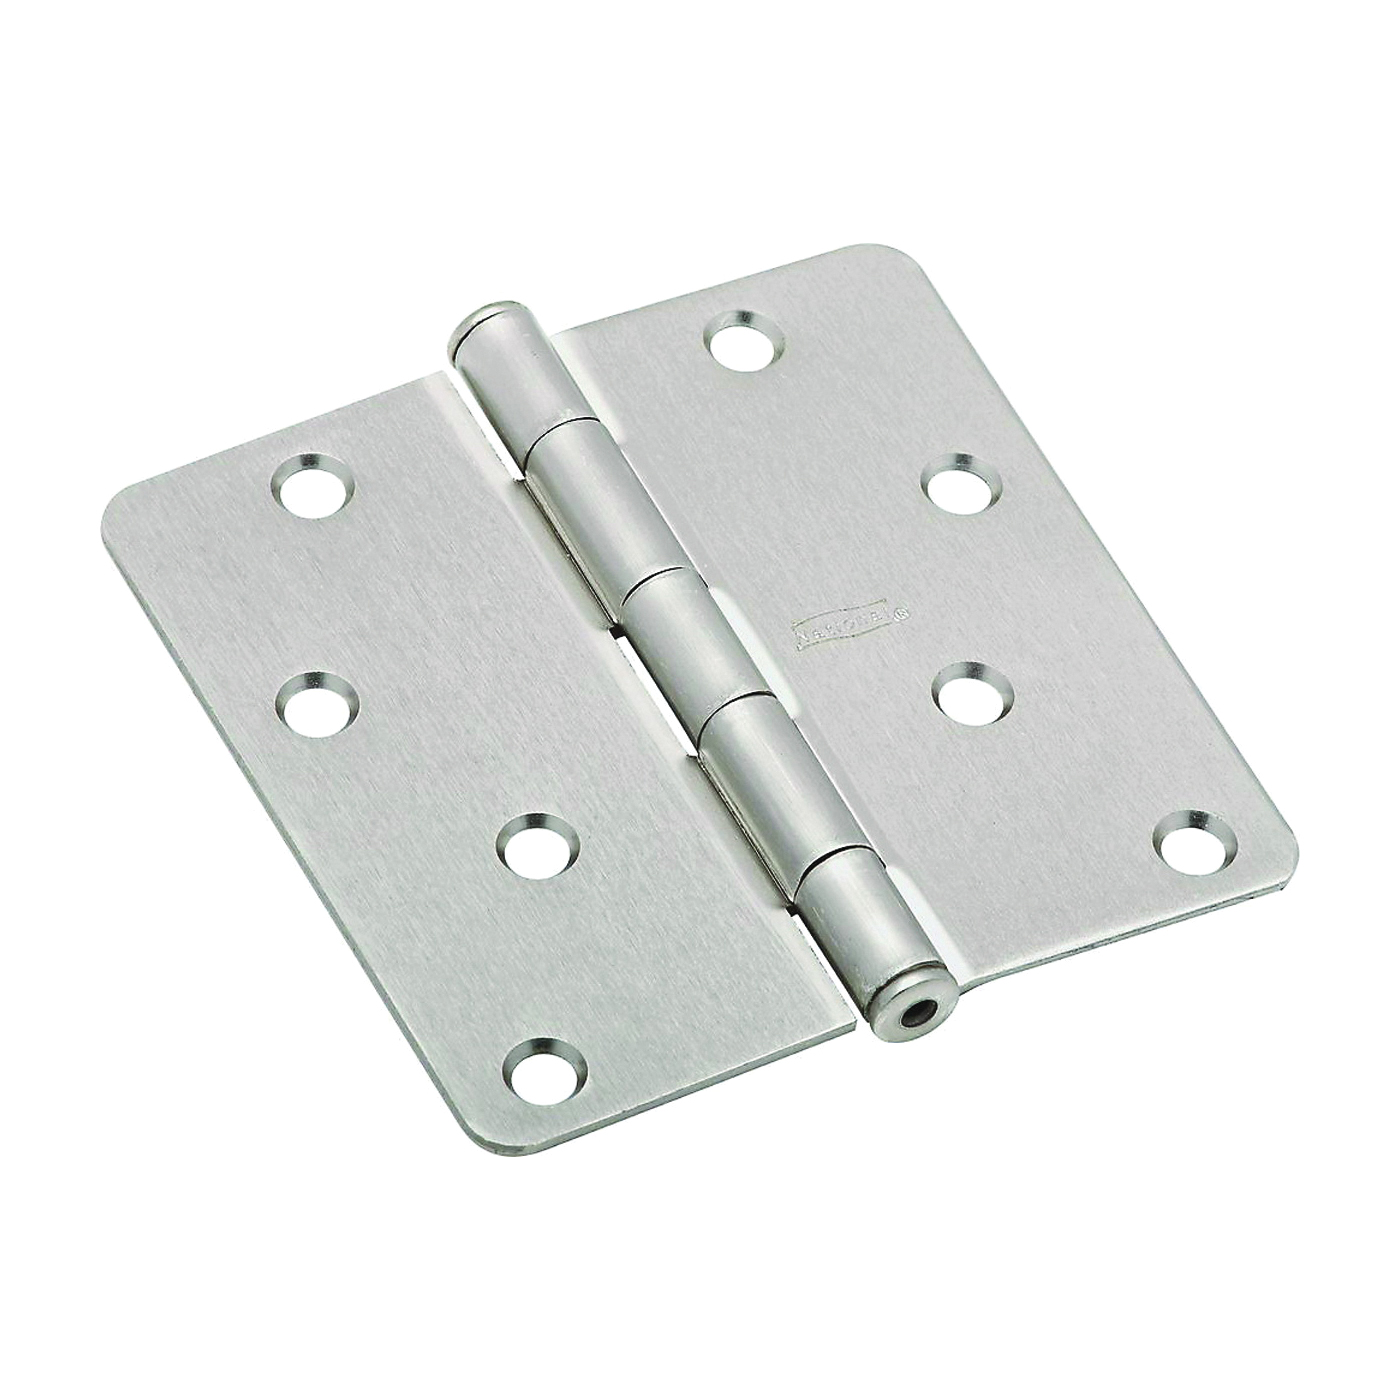 N830-246 Door Hinge, Cold Rolled Steel, Satin Nickel, Non-Rising, Removable Pin, Full-Mortise Mounting